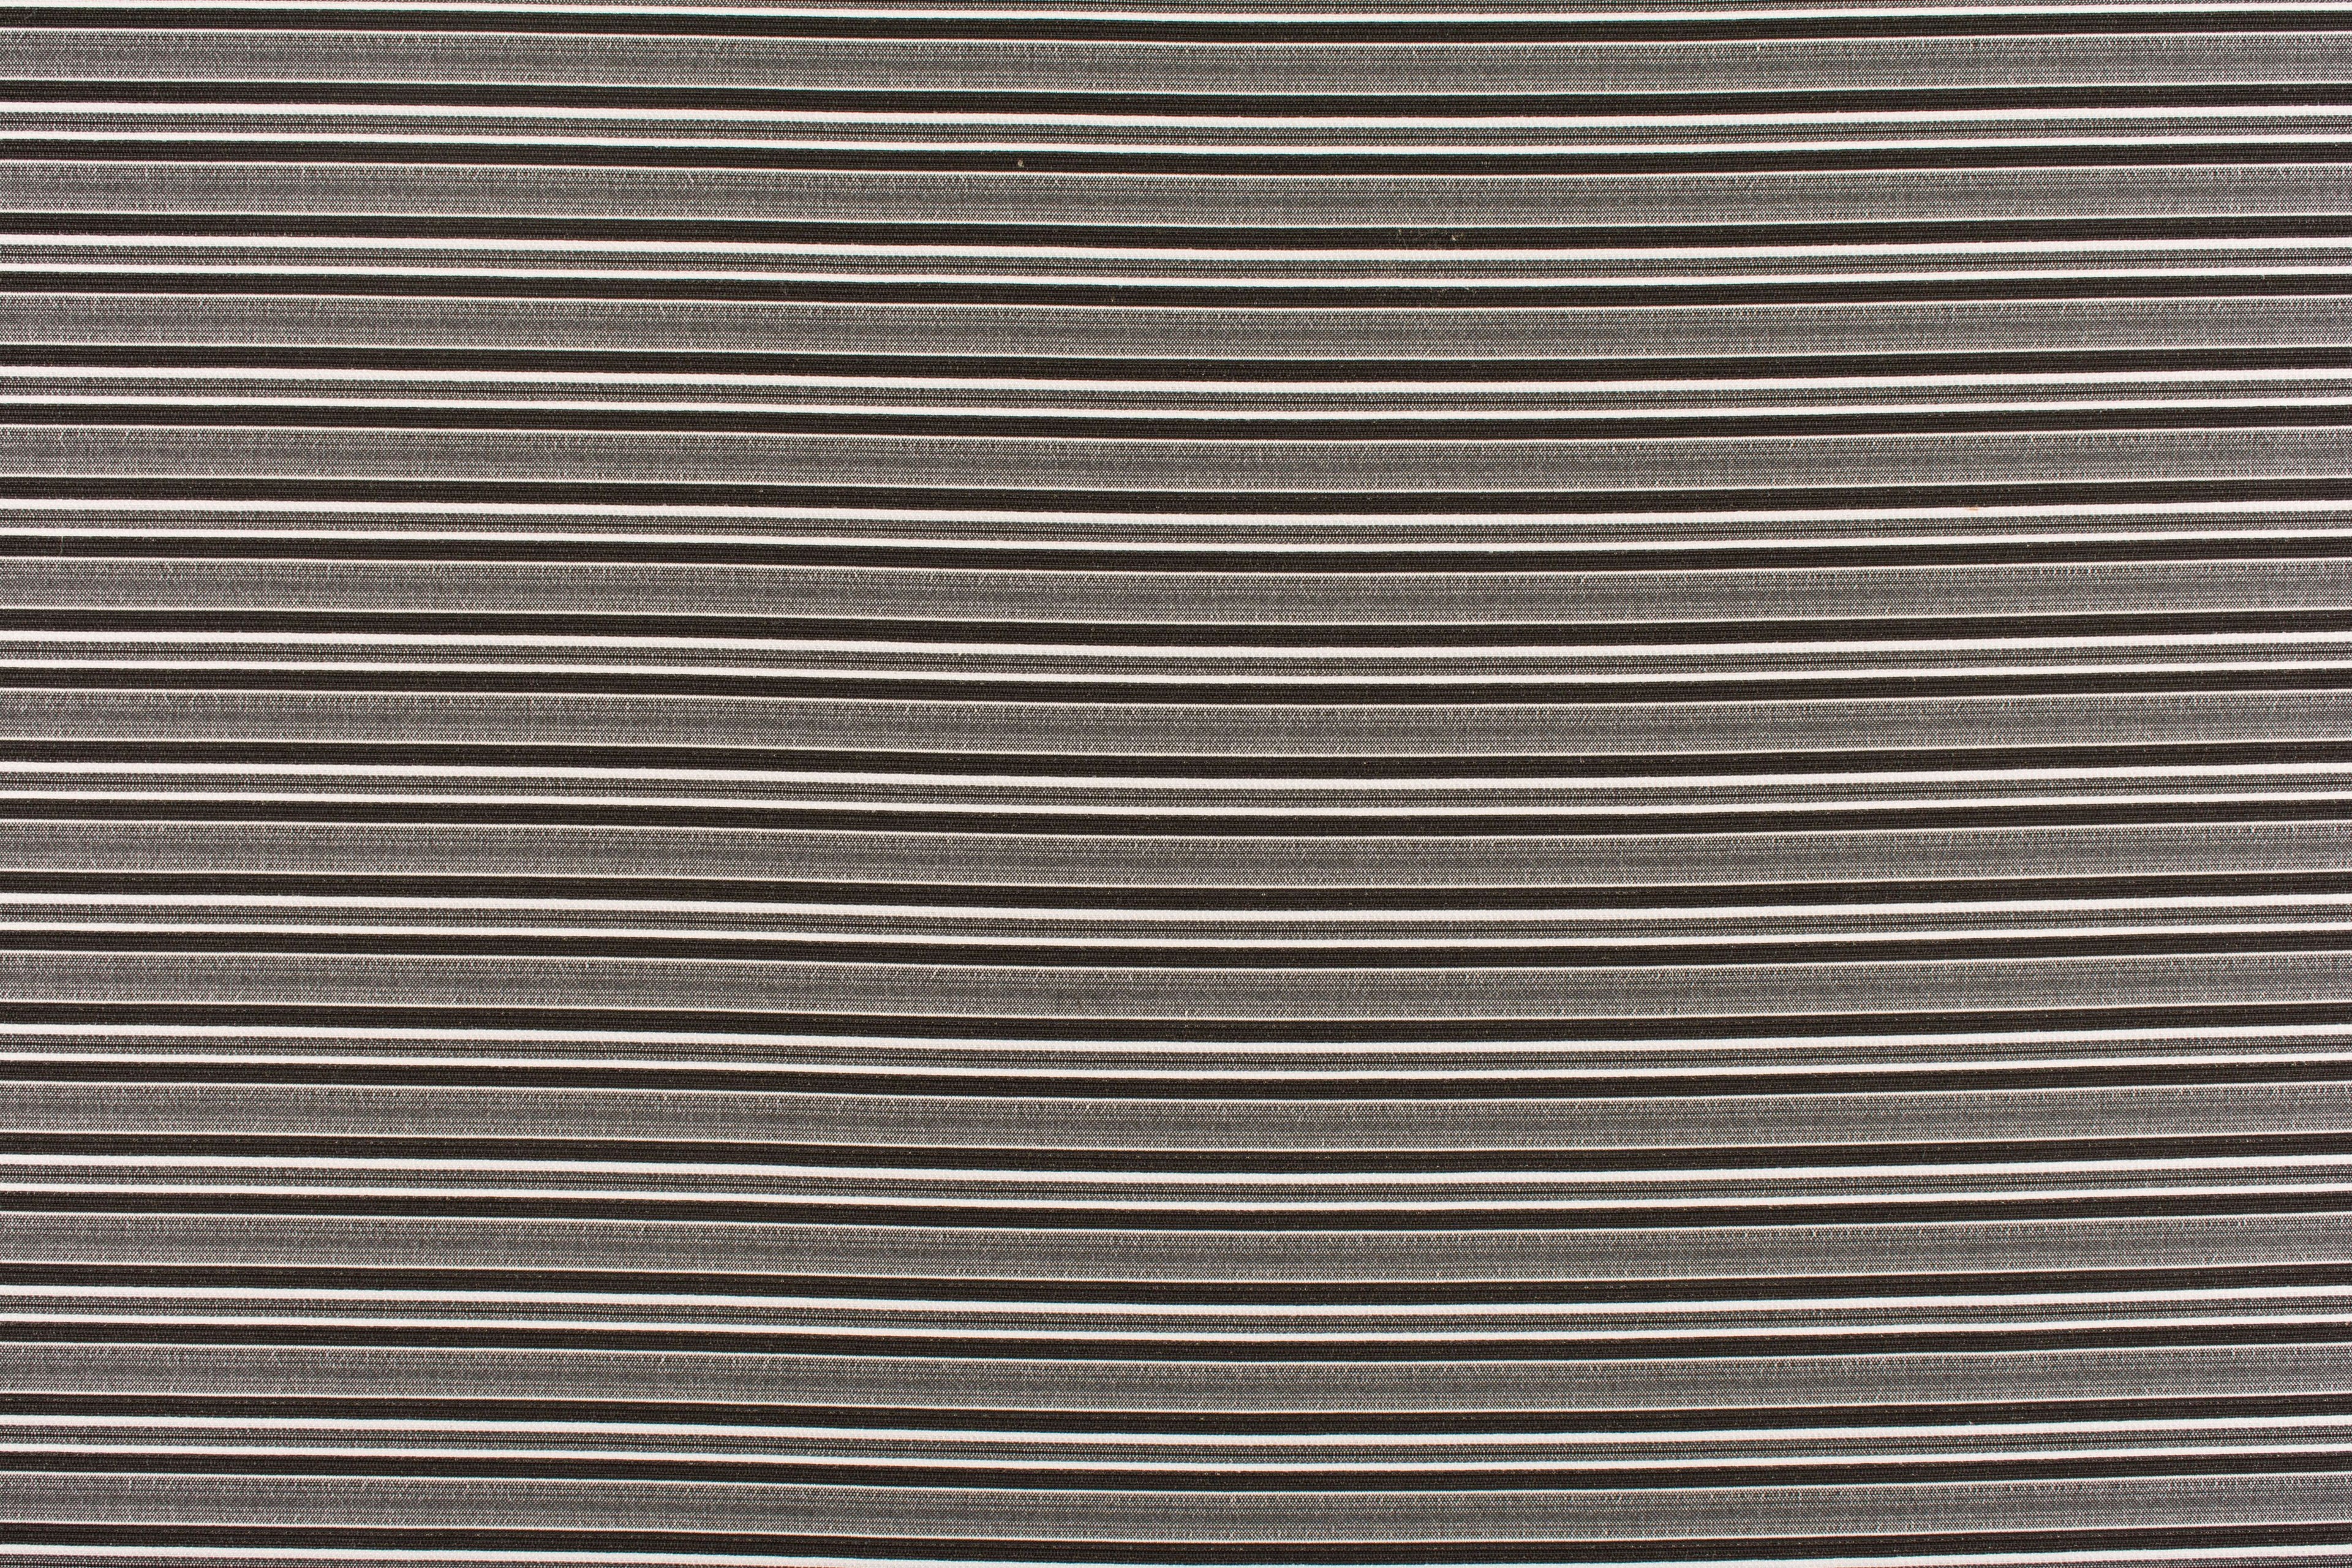 Steps Beach fabric in coal color - pattern number WR 00072661 - by Scalamandre in the Old World Weavers collection